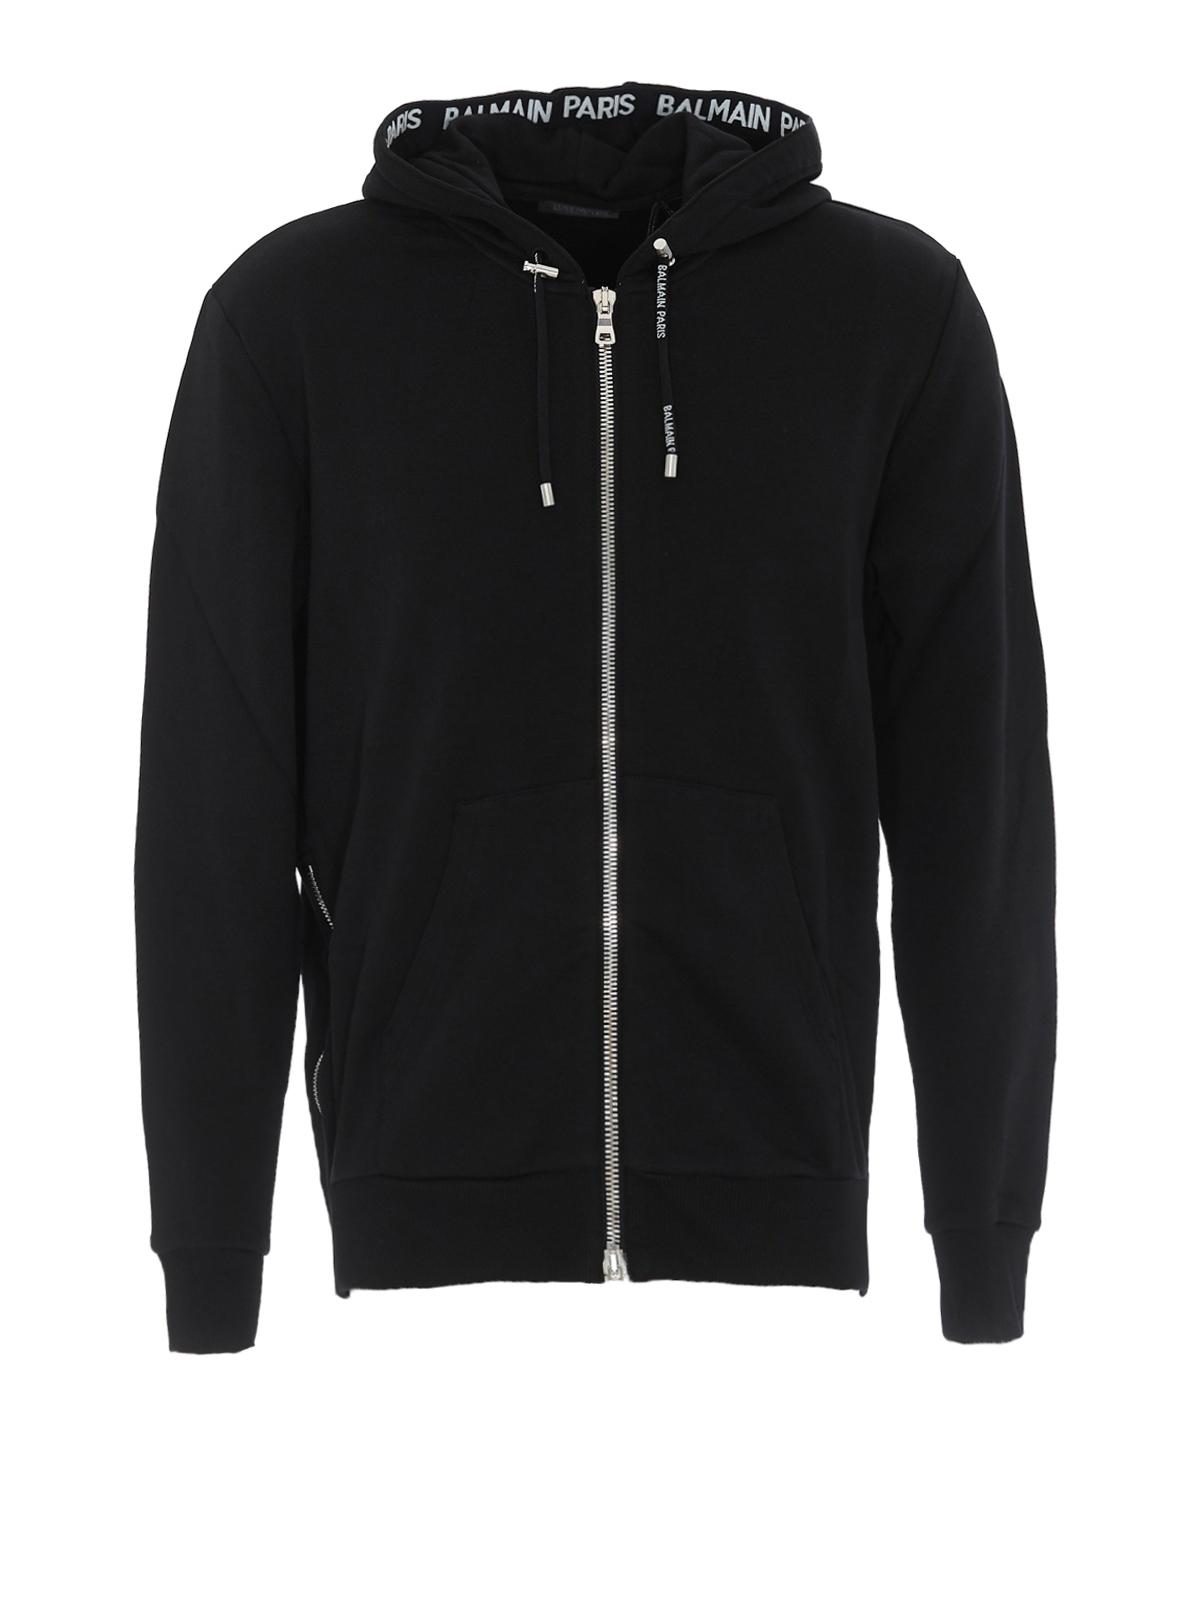 Balmain Black Cotton Hoodie With Logo Lettering for Men - Lyst